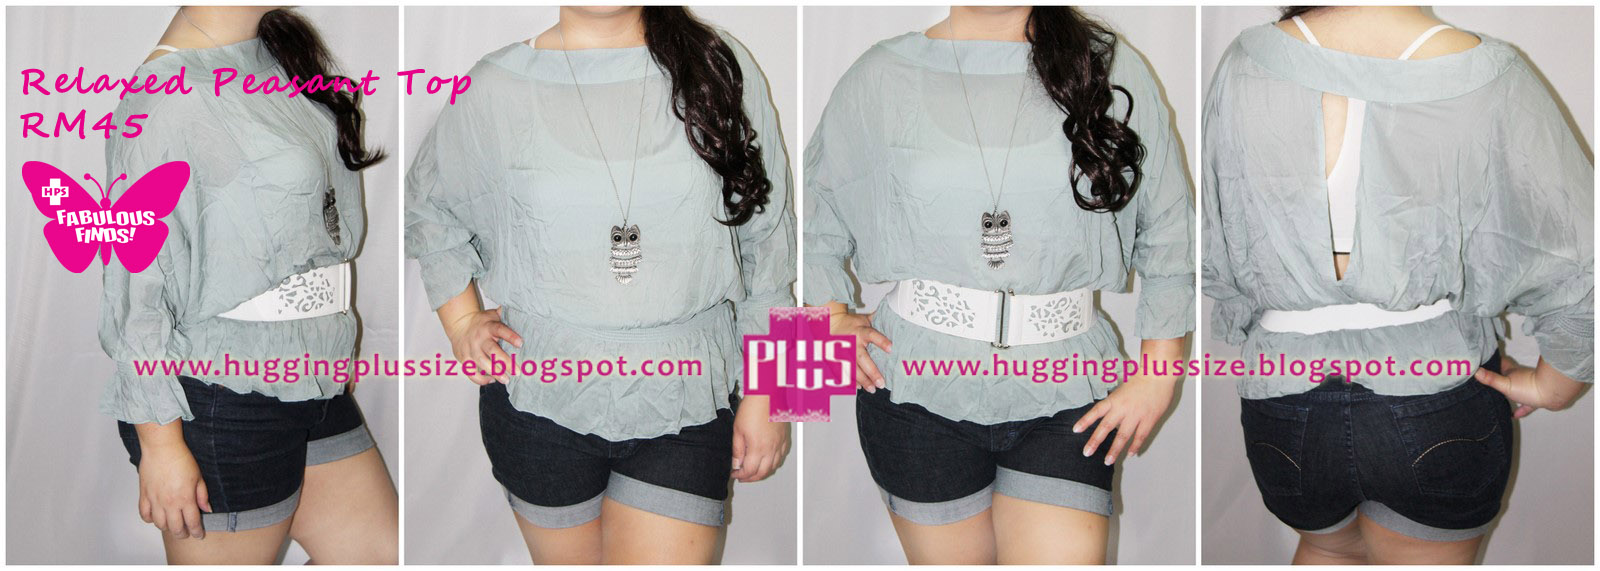 ♥♥ Hugging Plus Size ♥♥ style | plus size | fabulous: Relaxed Peasant ...